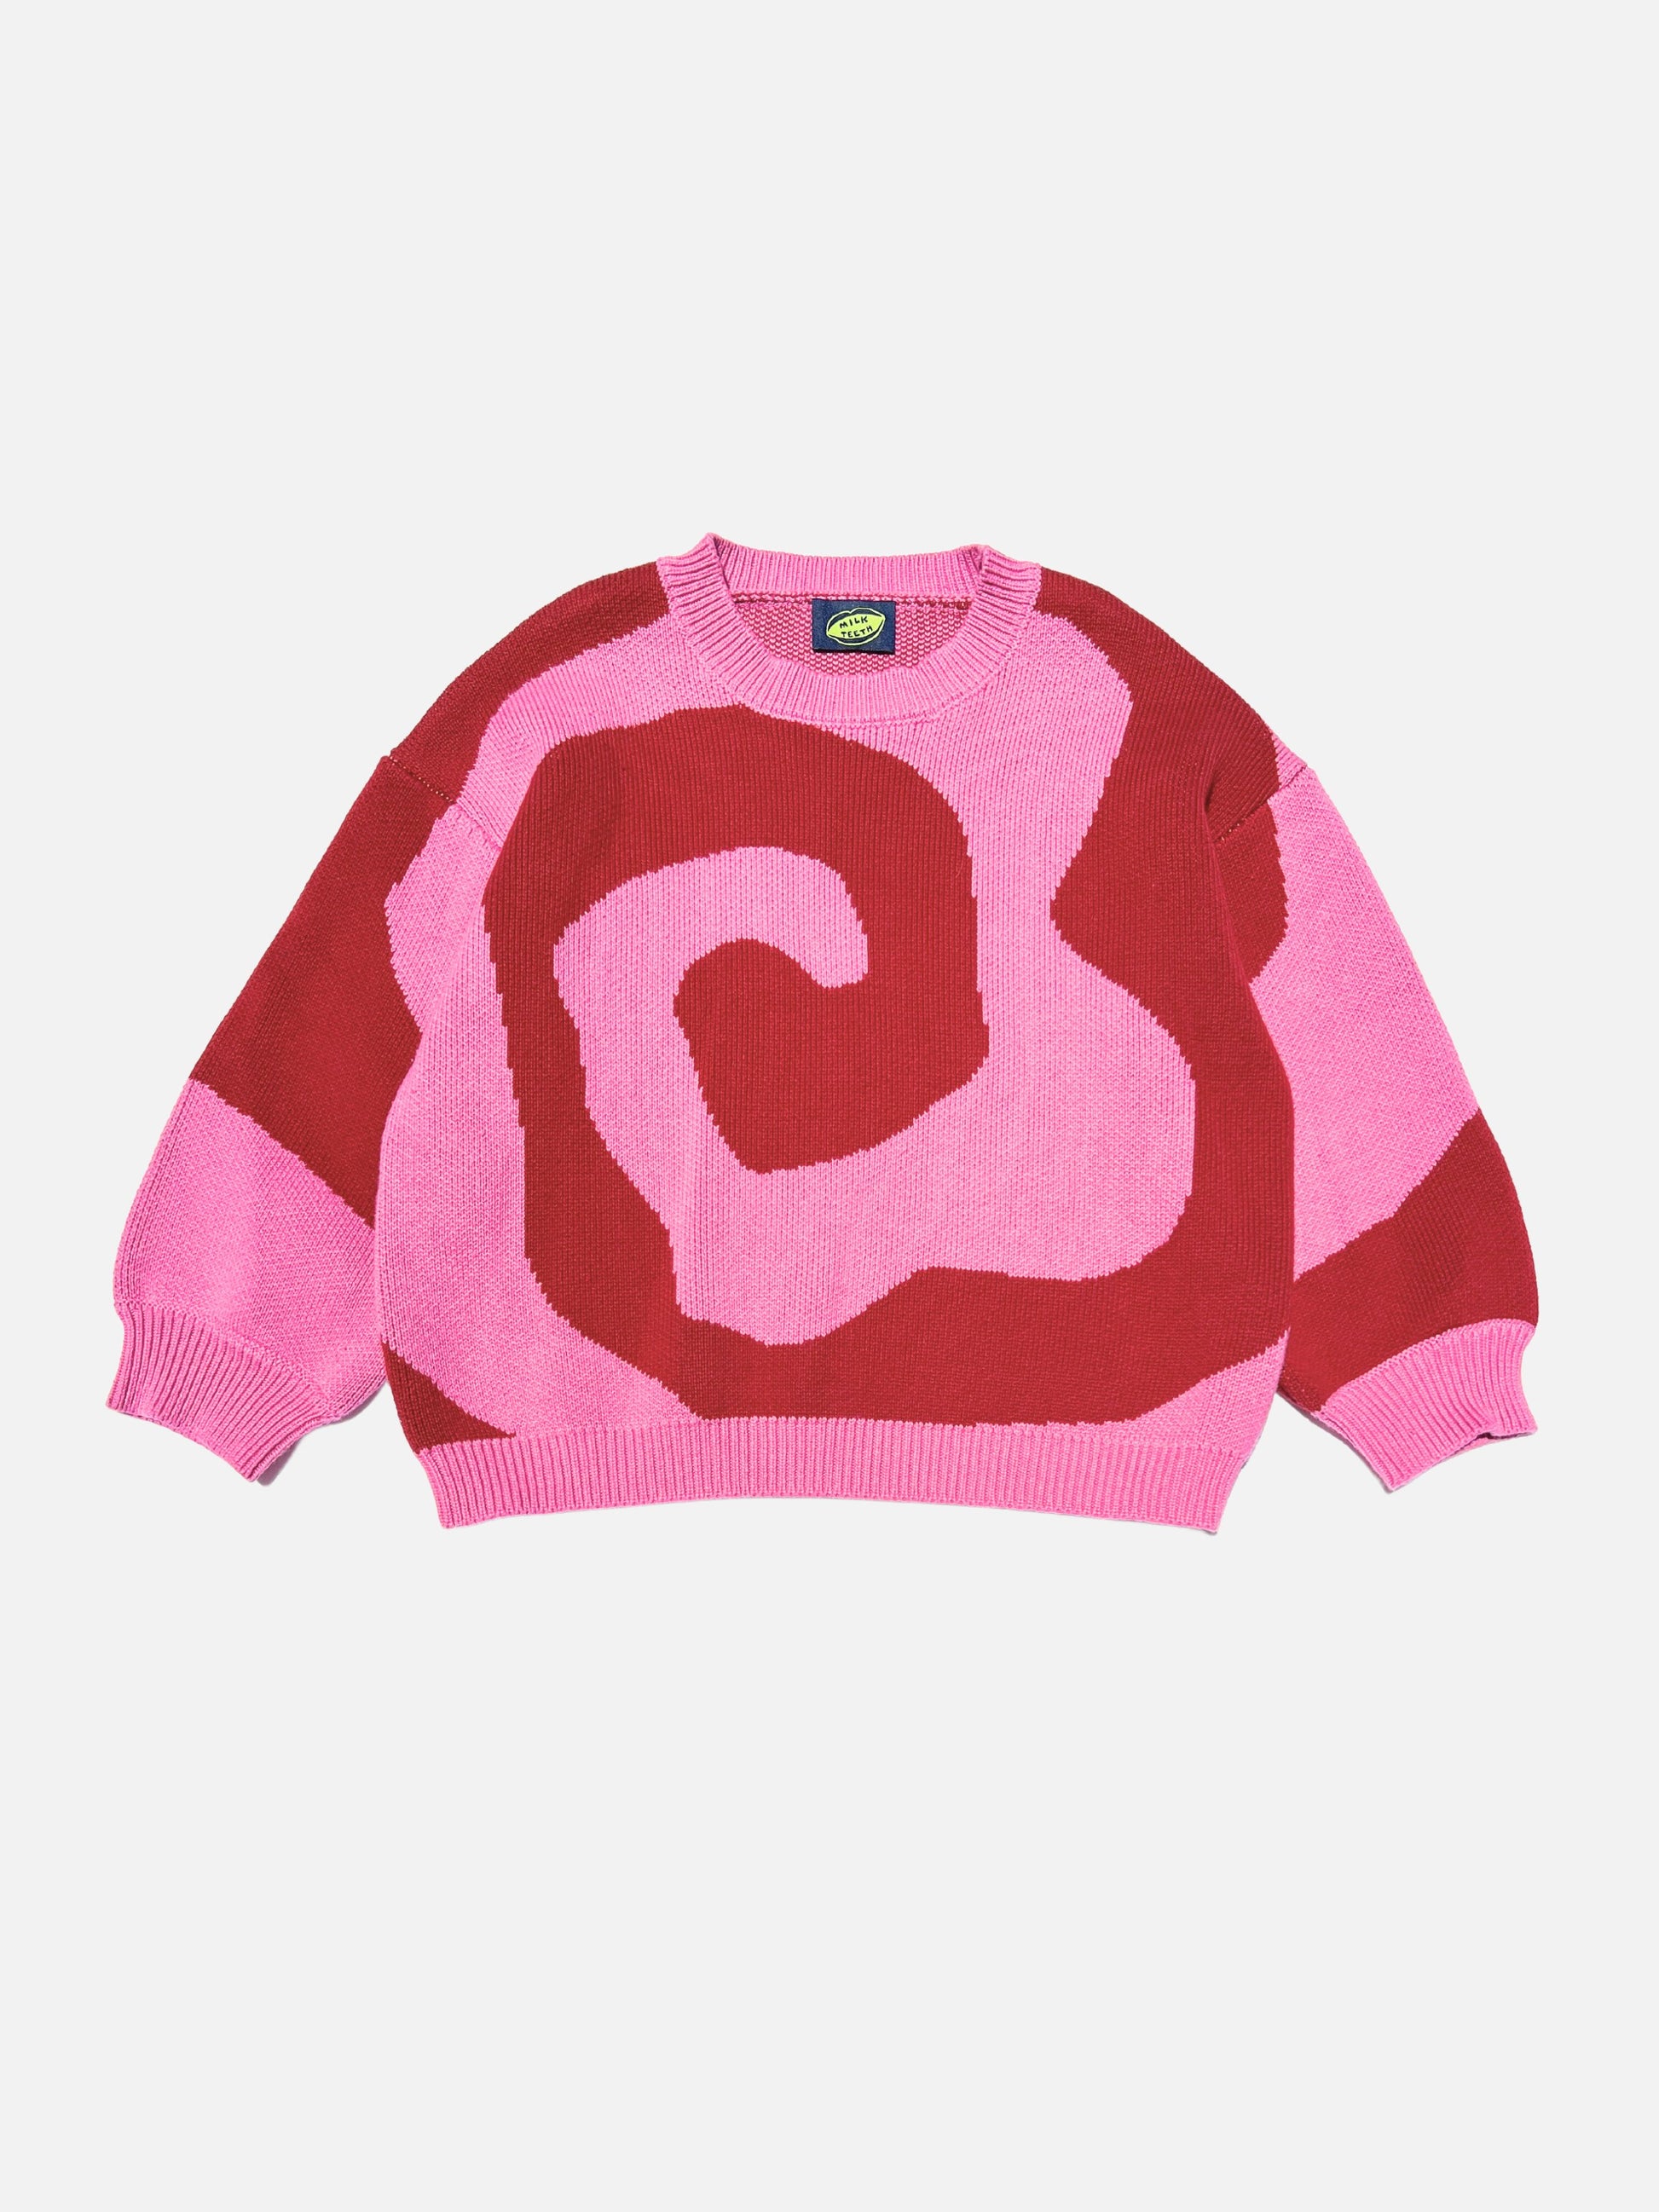 Front view of kids crewneck sweater in bright pink, with a large single red swirl design that covers the entire sweater.